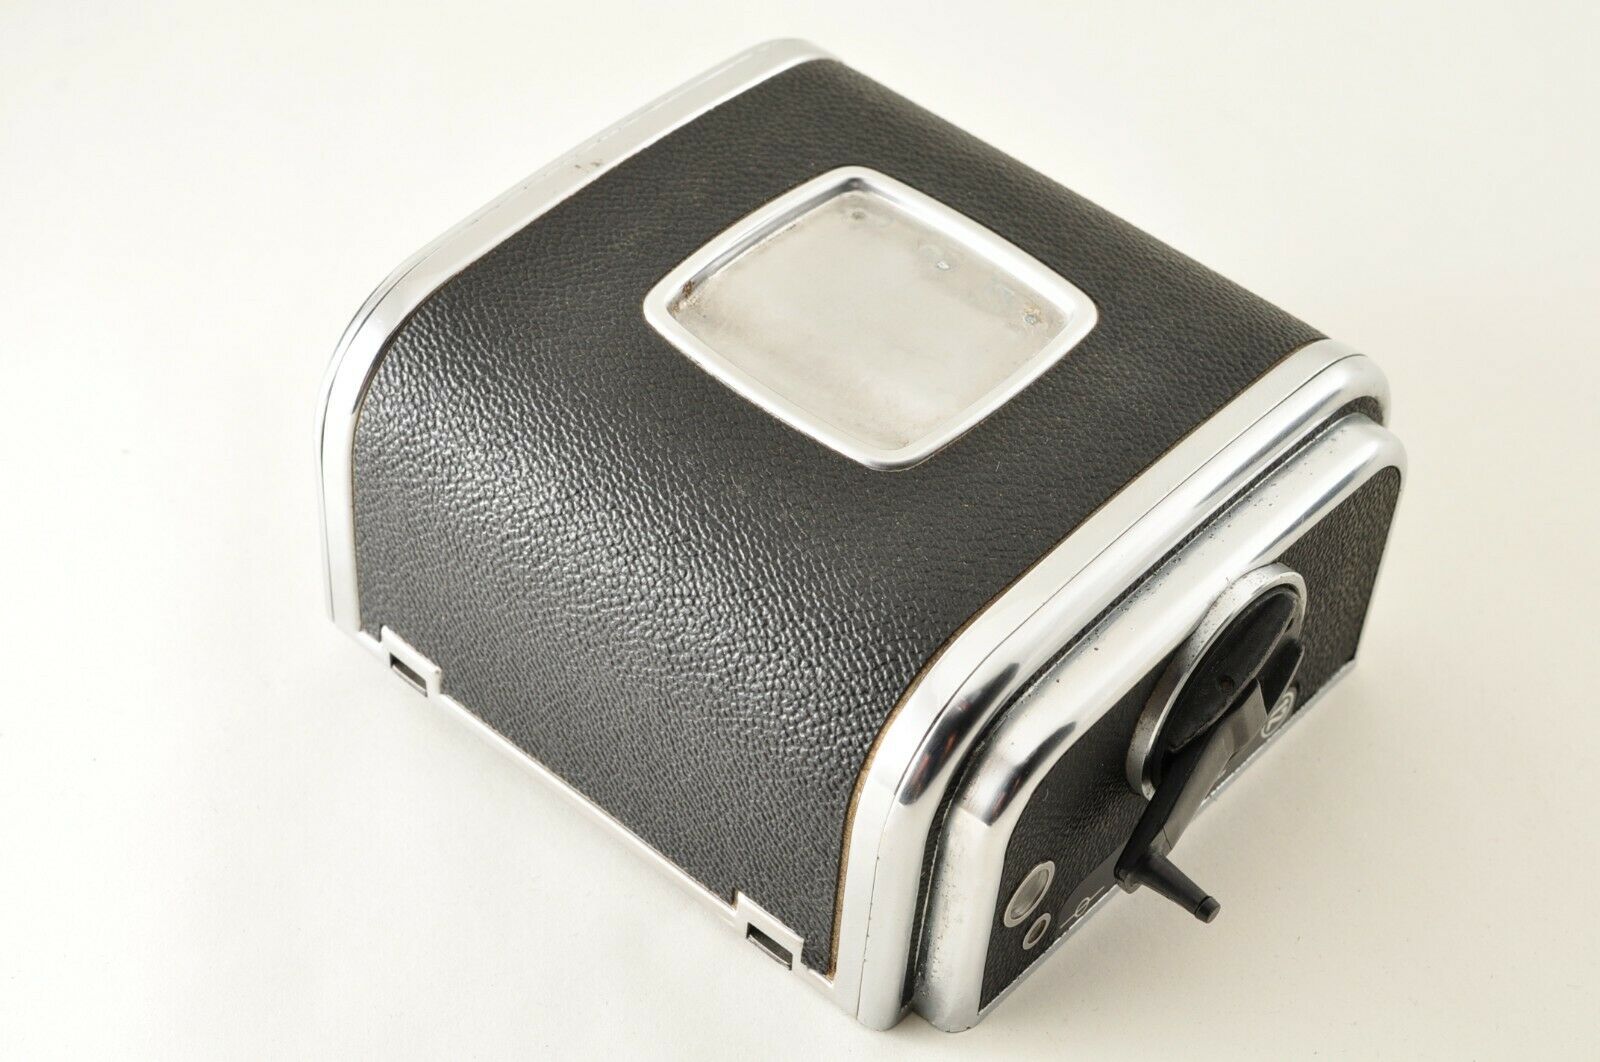 Hasselblad A12 6x6 Type Ii 120 Film Back Magazine Hasselblad From Japan